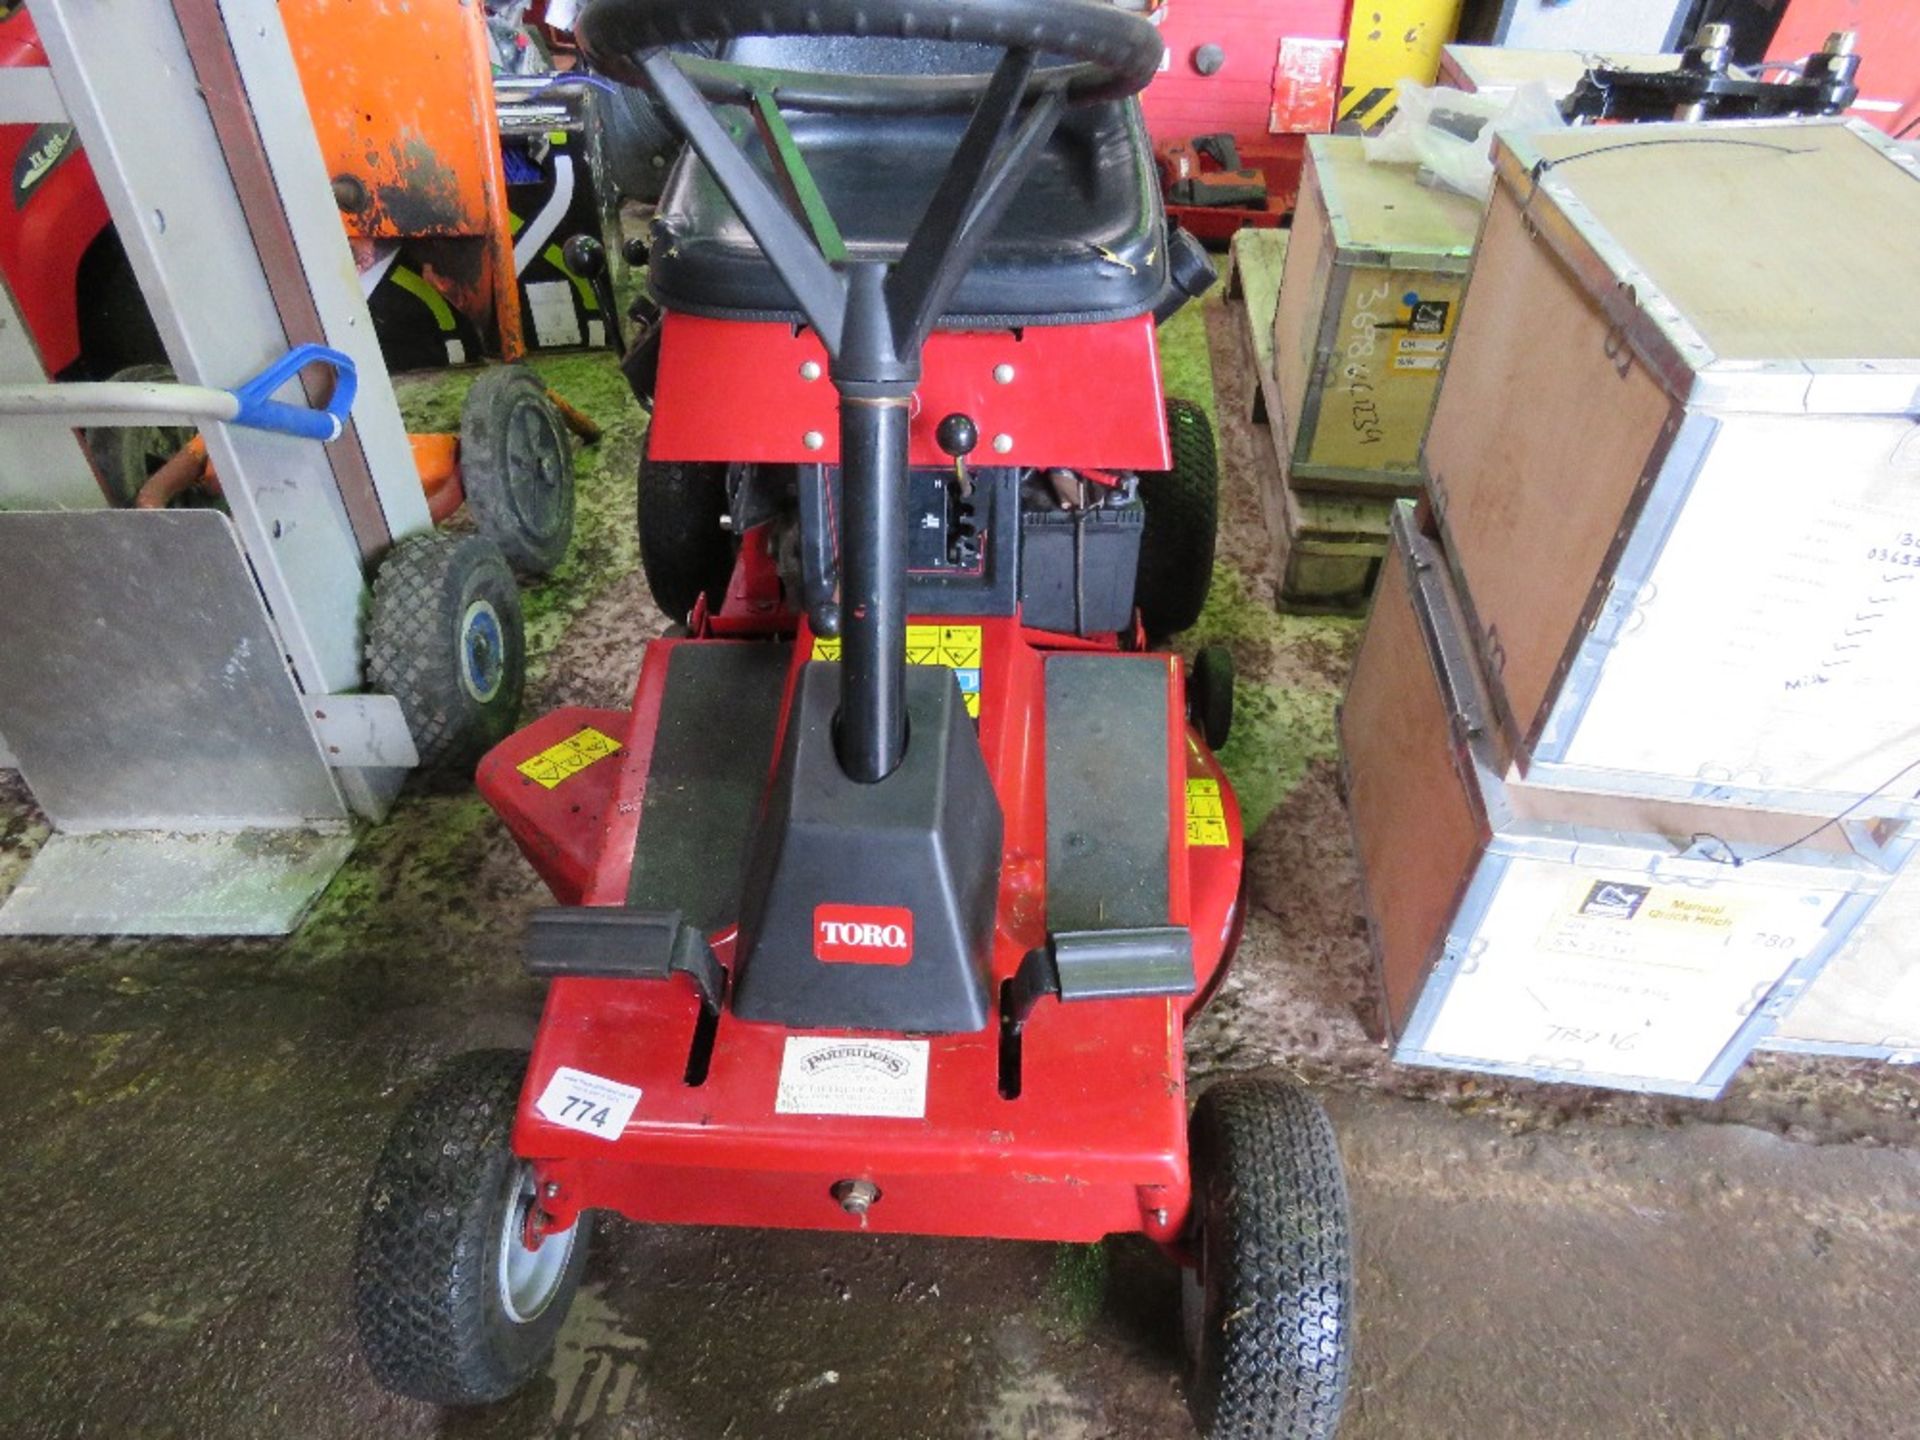 WHEELHORSE 8-25 RIDE ON MOWER. BATTERY LOW, UNTESTED.....THIS LOT IS SOLD UNDER THE AUCTIONEERS MARG - Image 3 of 7